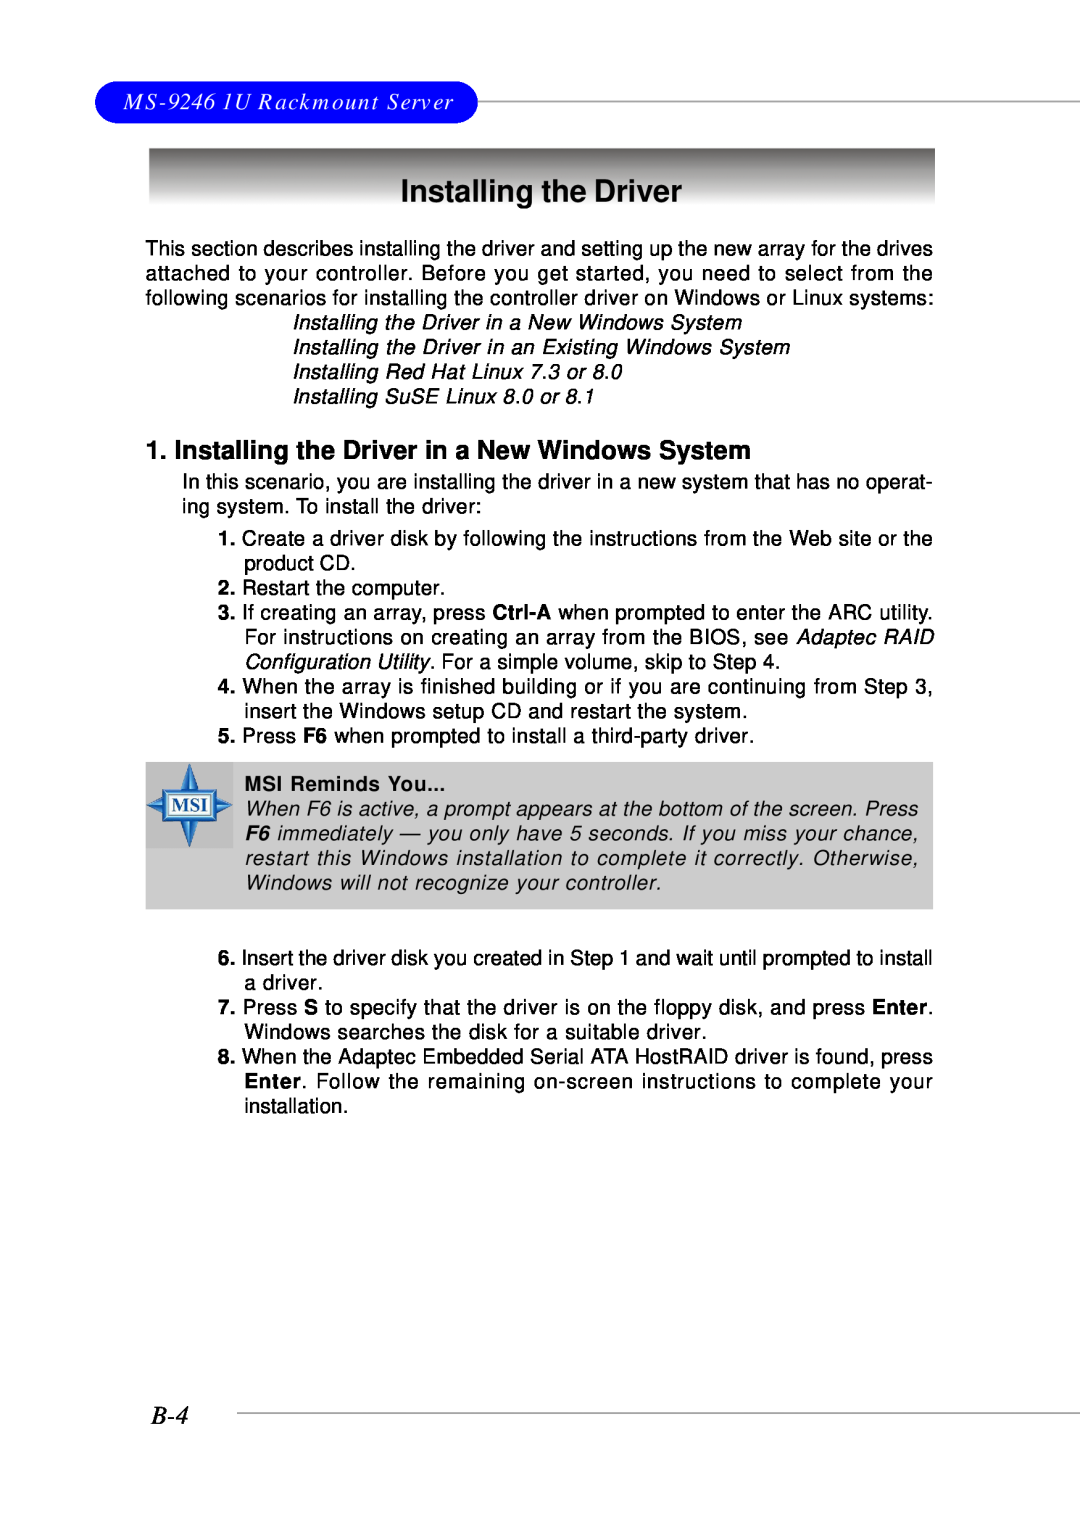 MSI manual MS-9246 1U Rackmount Server, Installing the Driver in a New Windows System, MSI Reminds You 